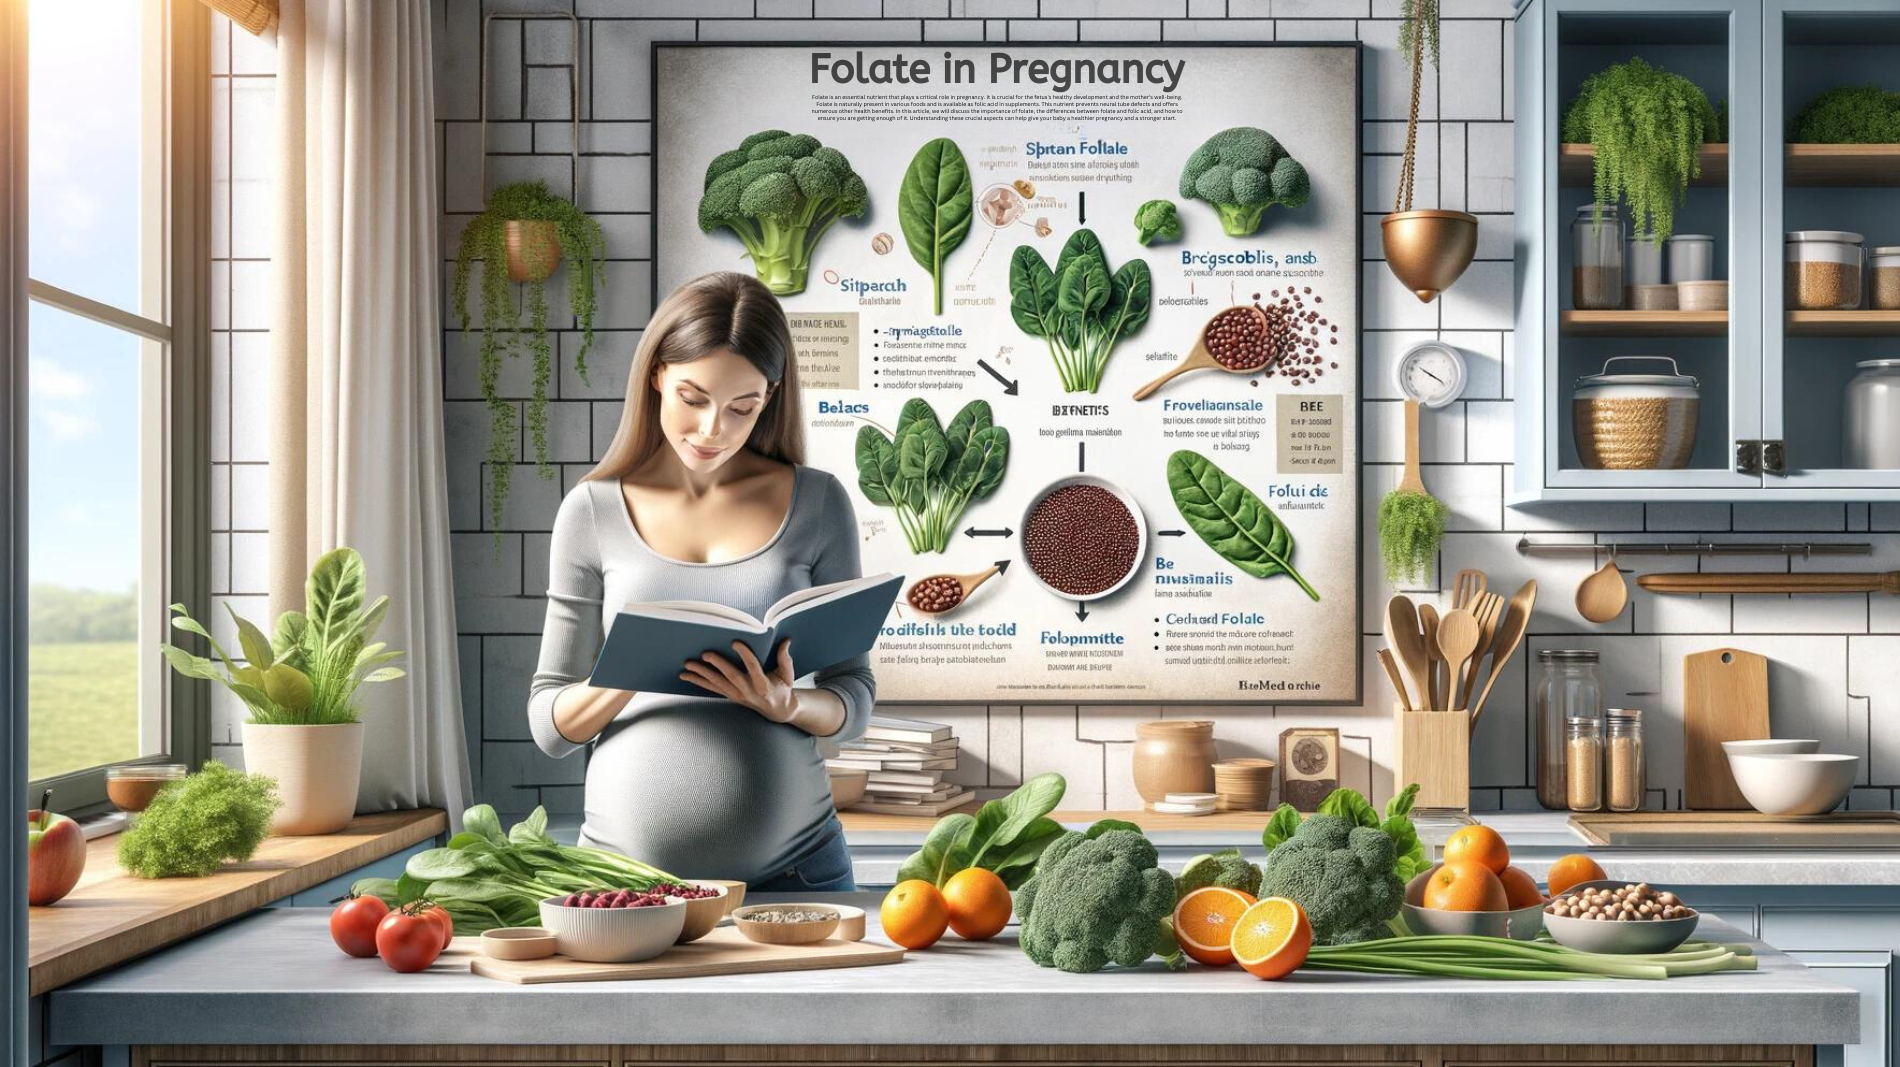 Folate Essentials for Pregnancy: Benefits and Sources